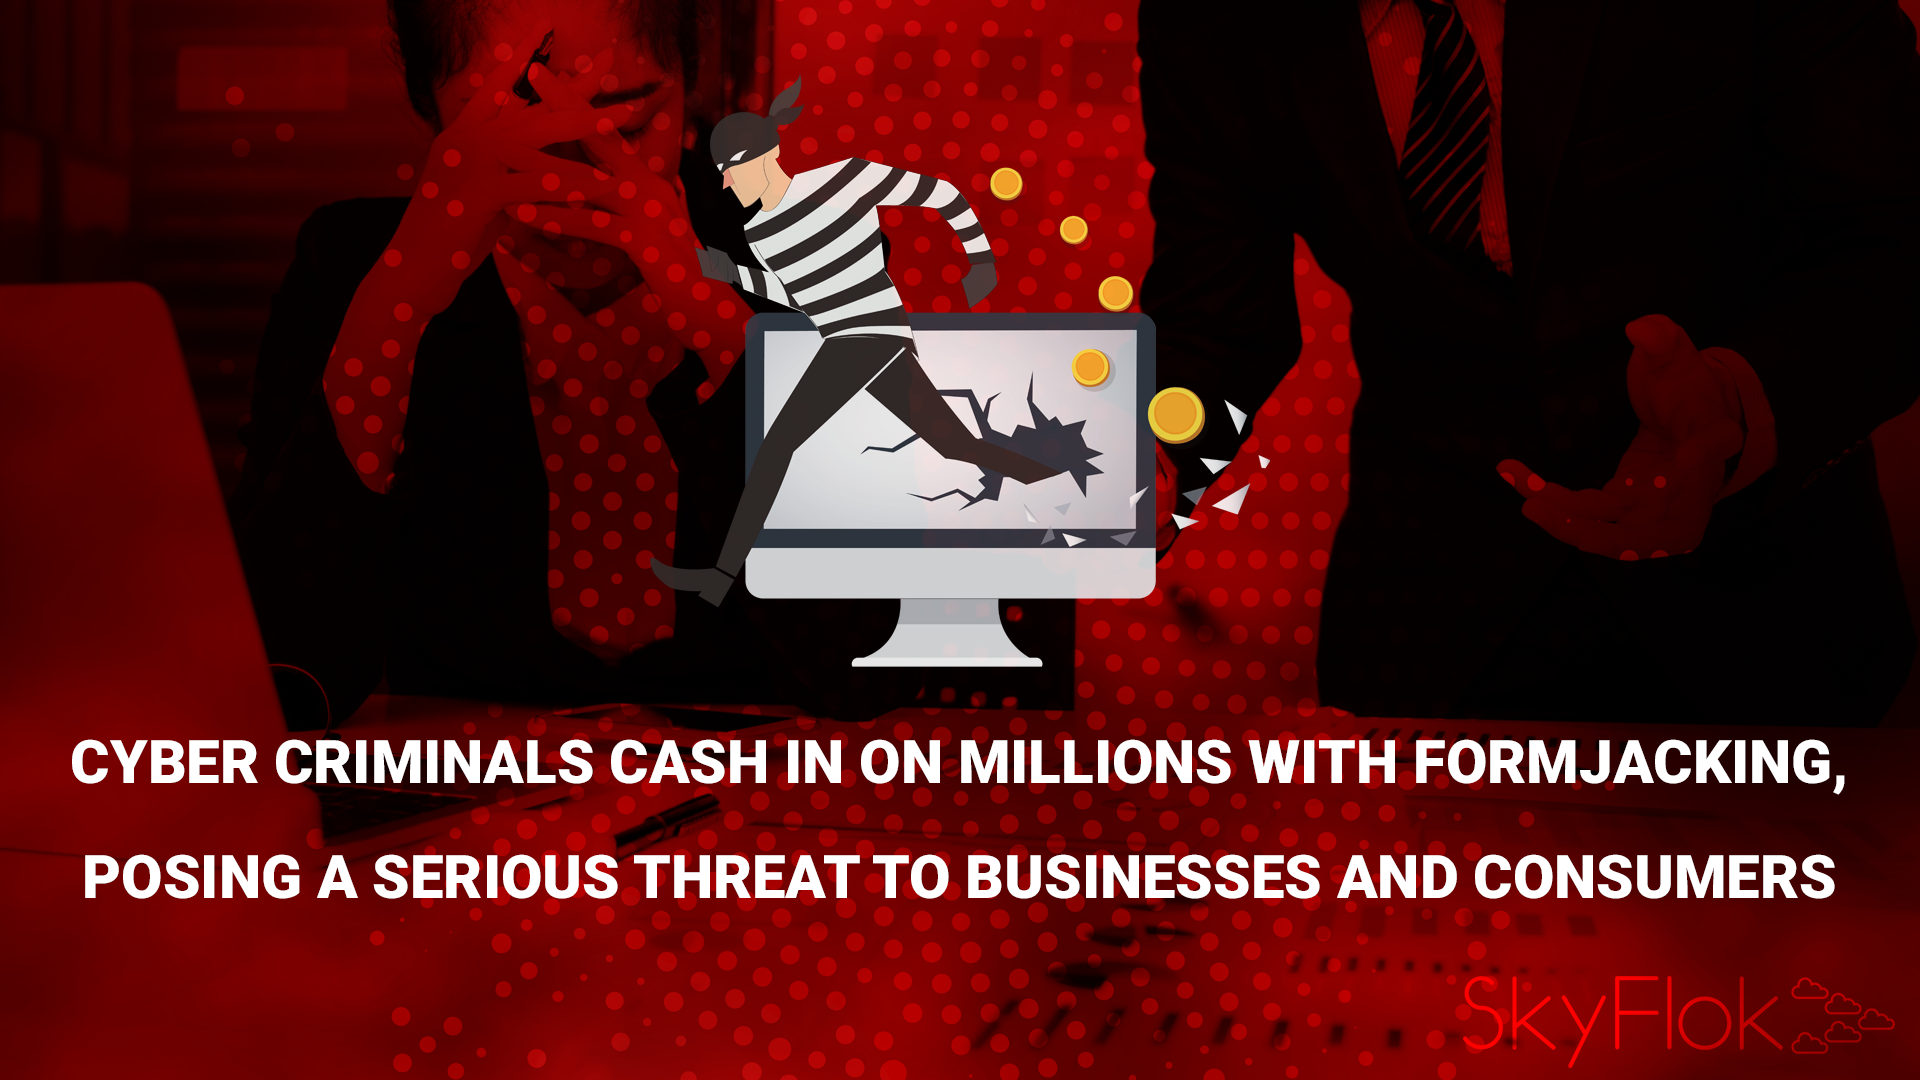 You are currently viewing Cyber Criminals Cash in on Millions With Formjacking, Posing a Serious Threat to Businesses and Consumers